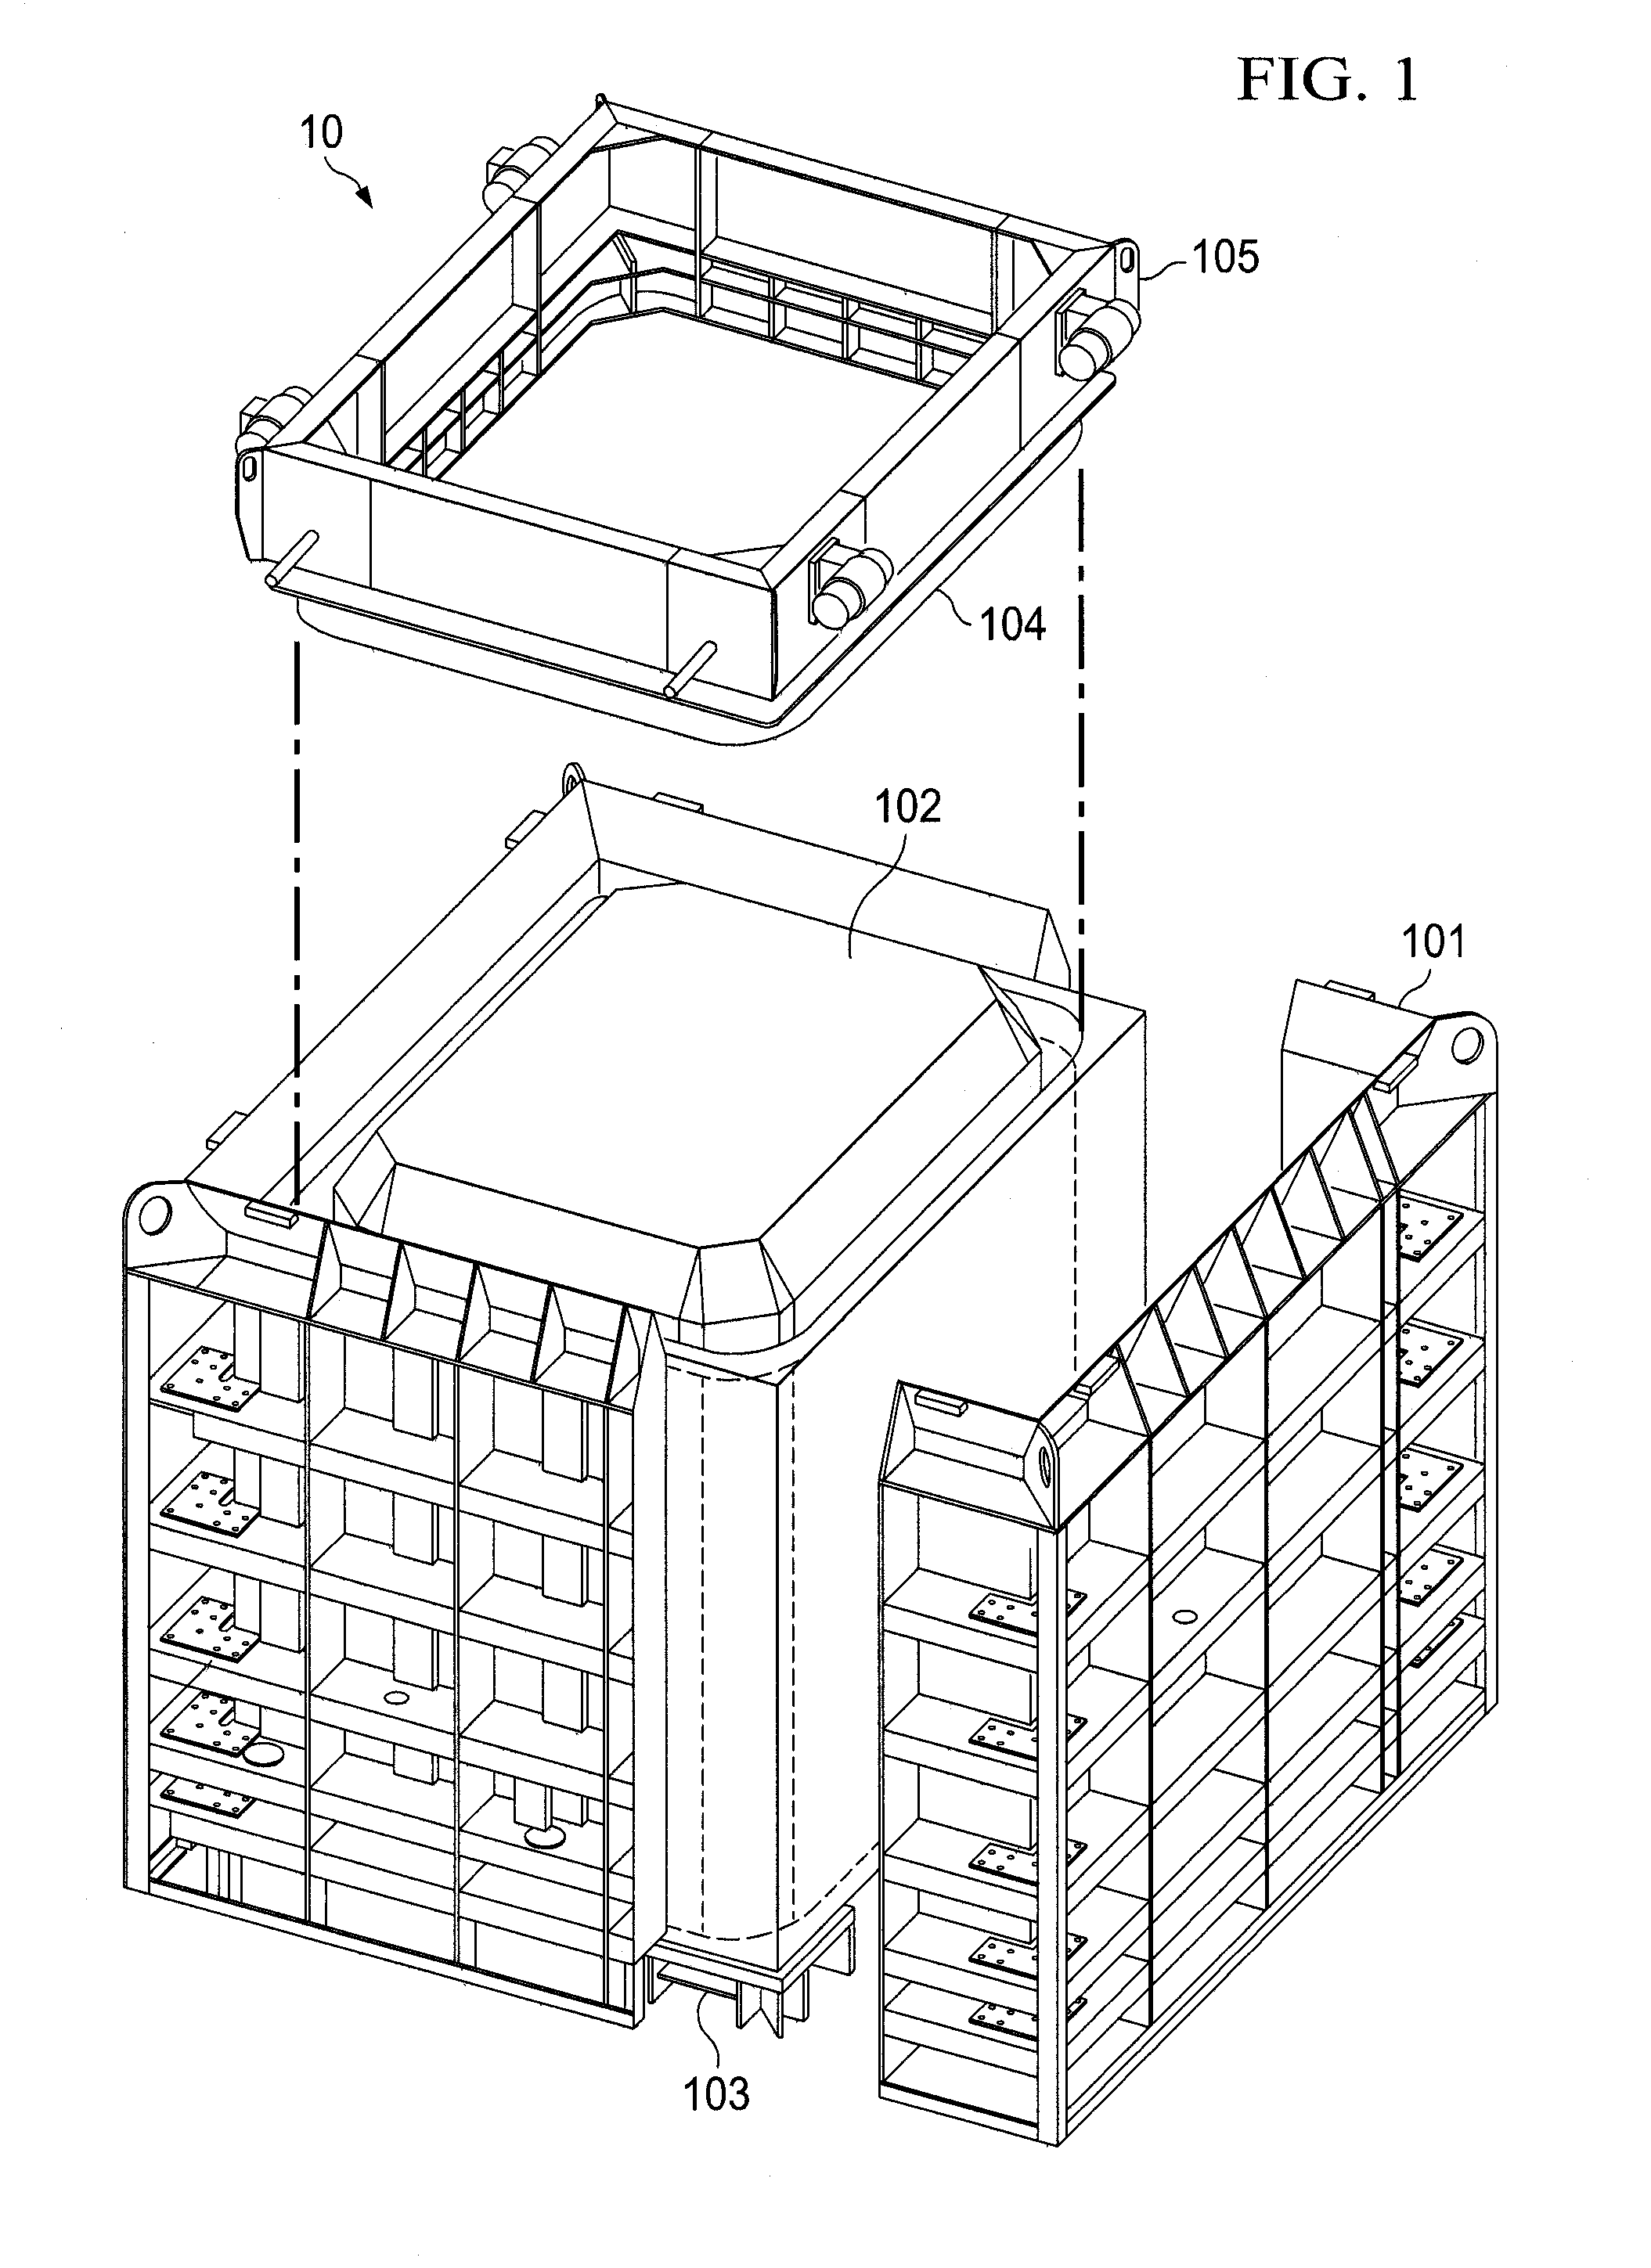 System and method for constructing modular concrete ducts